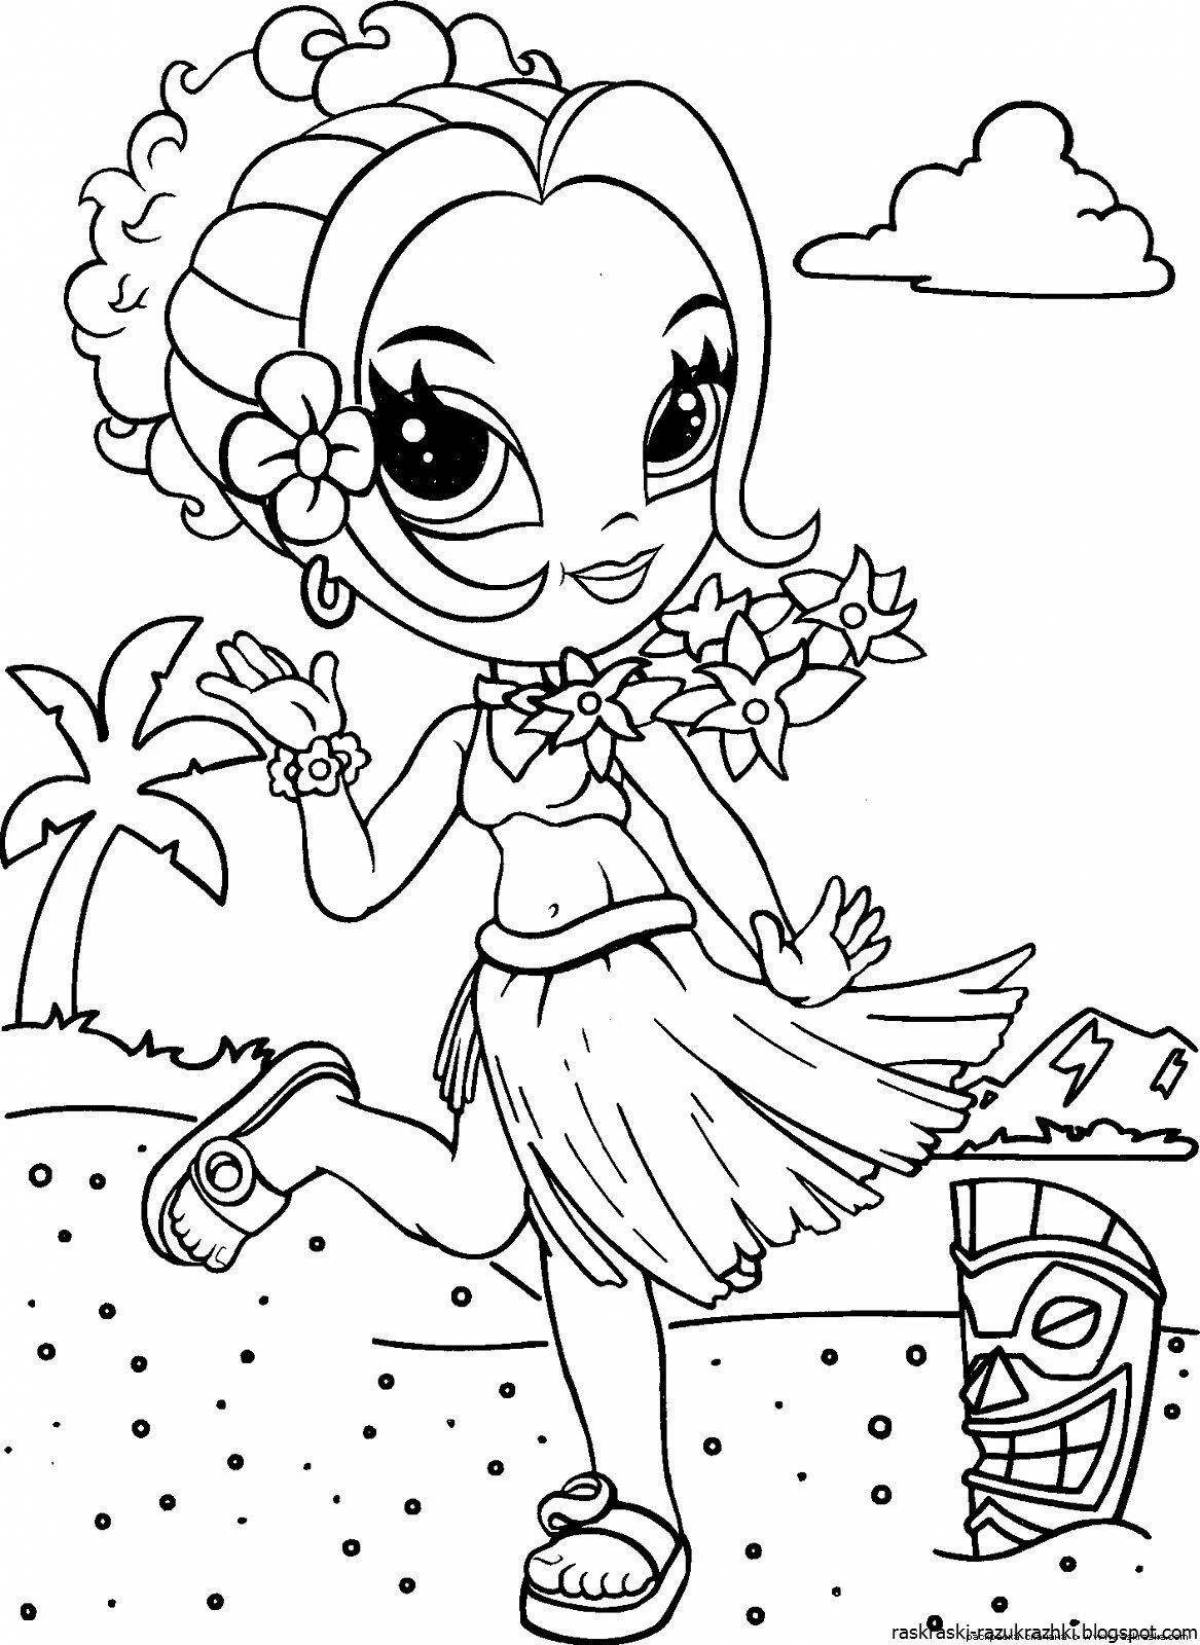 Amazing coloring book for 9 year old girls